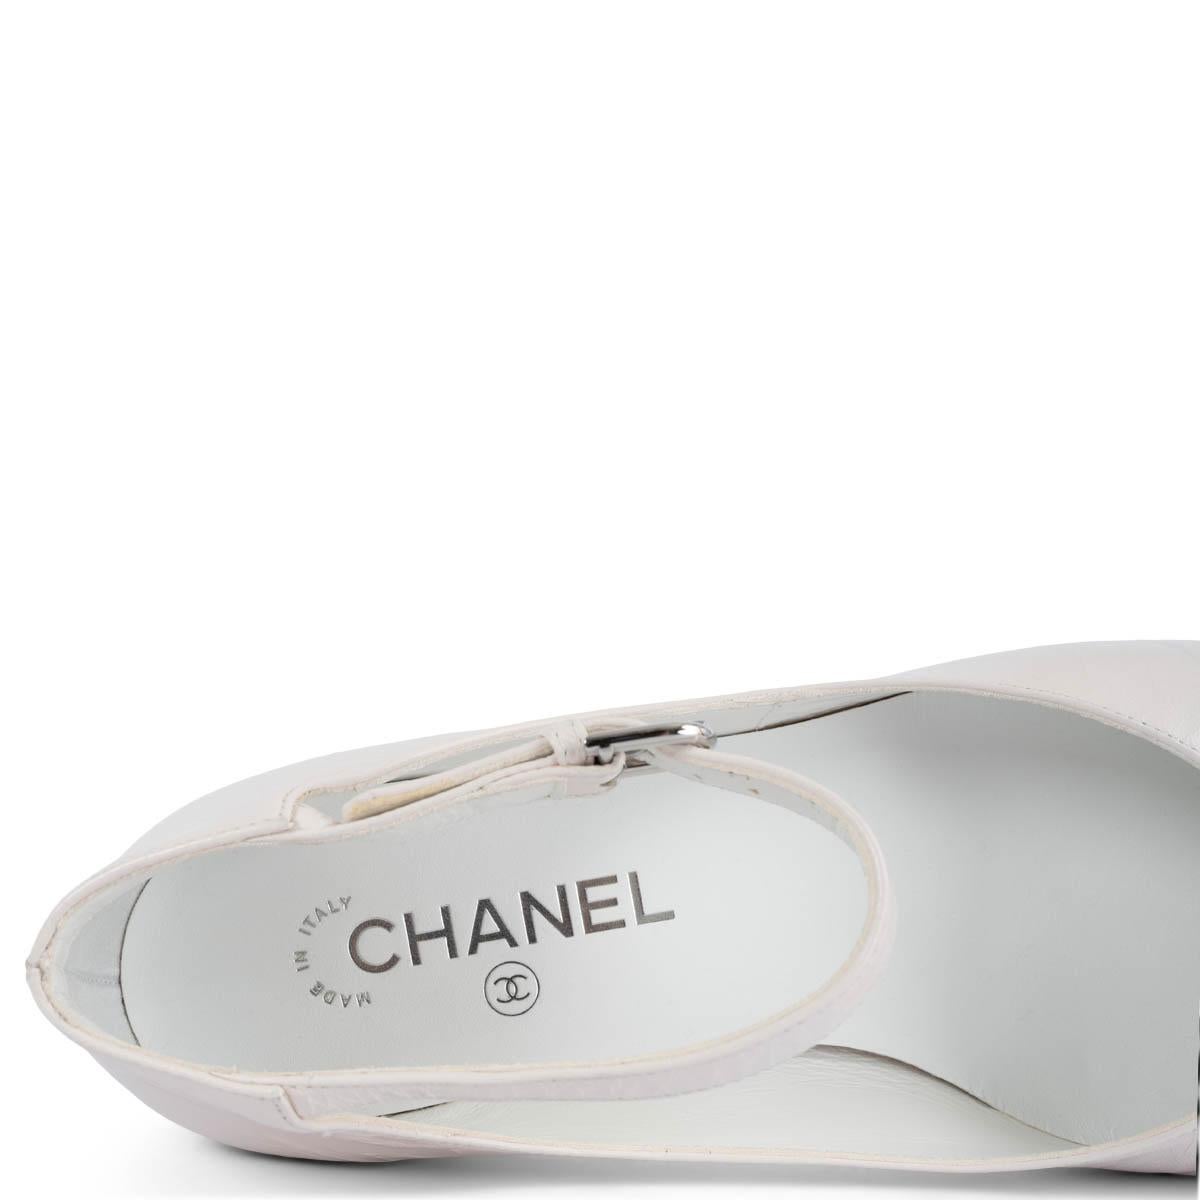 CHANEL white crinkled leather 2022 22B MARY JANE Flats Shoes 38.5 1